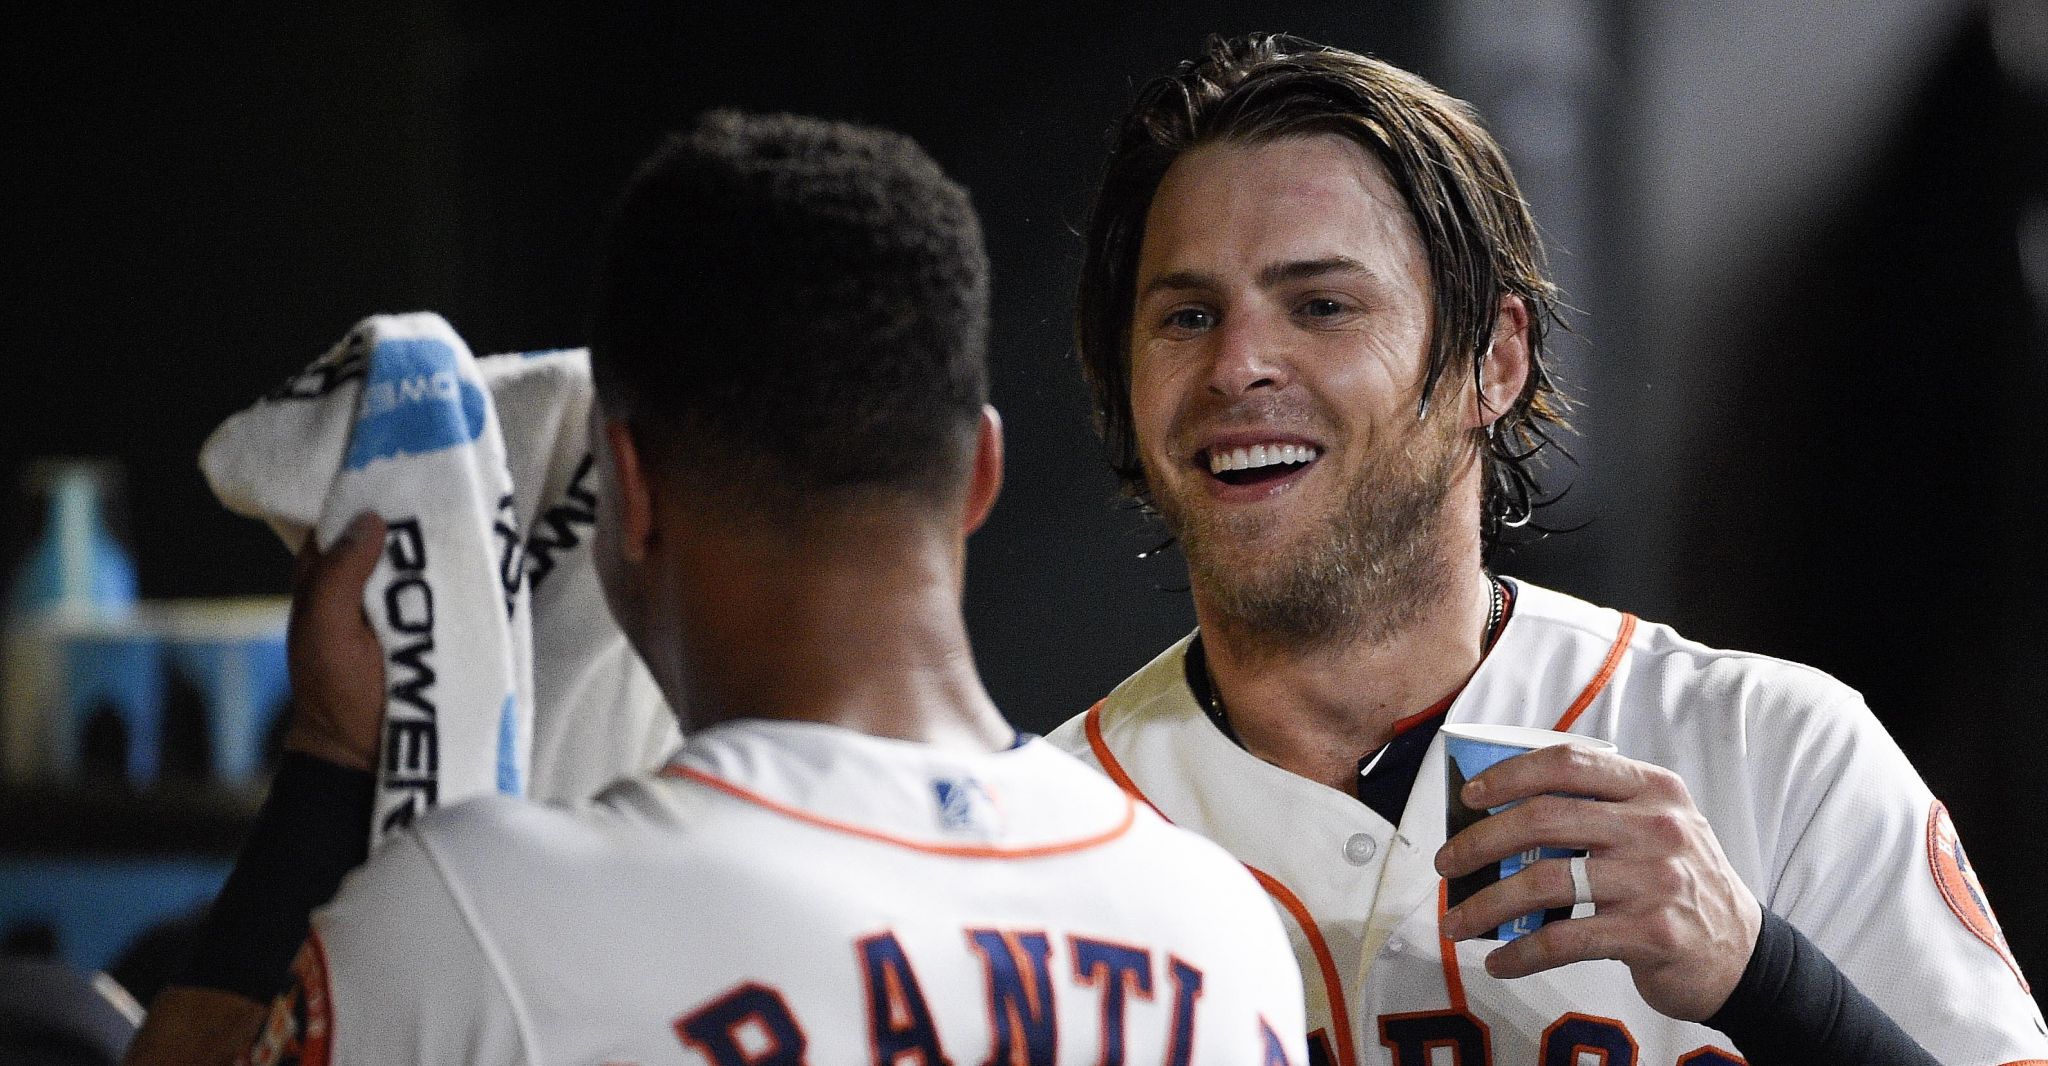 Astros' A.J. Hinch: Josh Reddick came to right place for advice